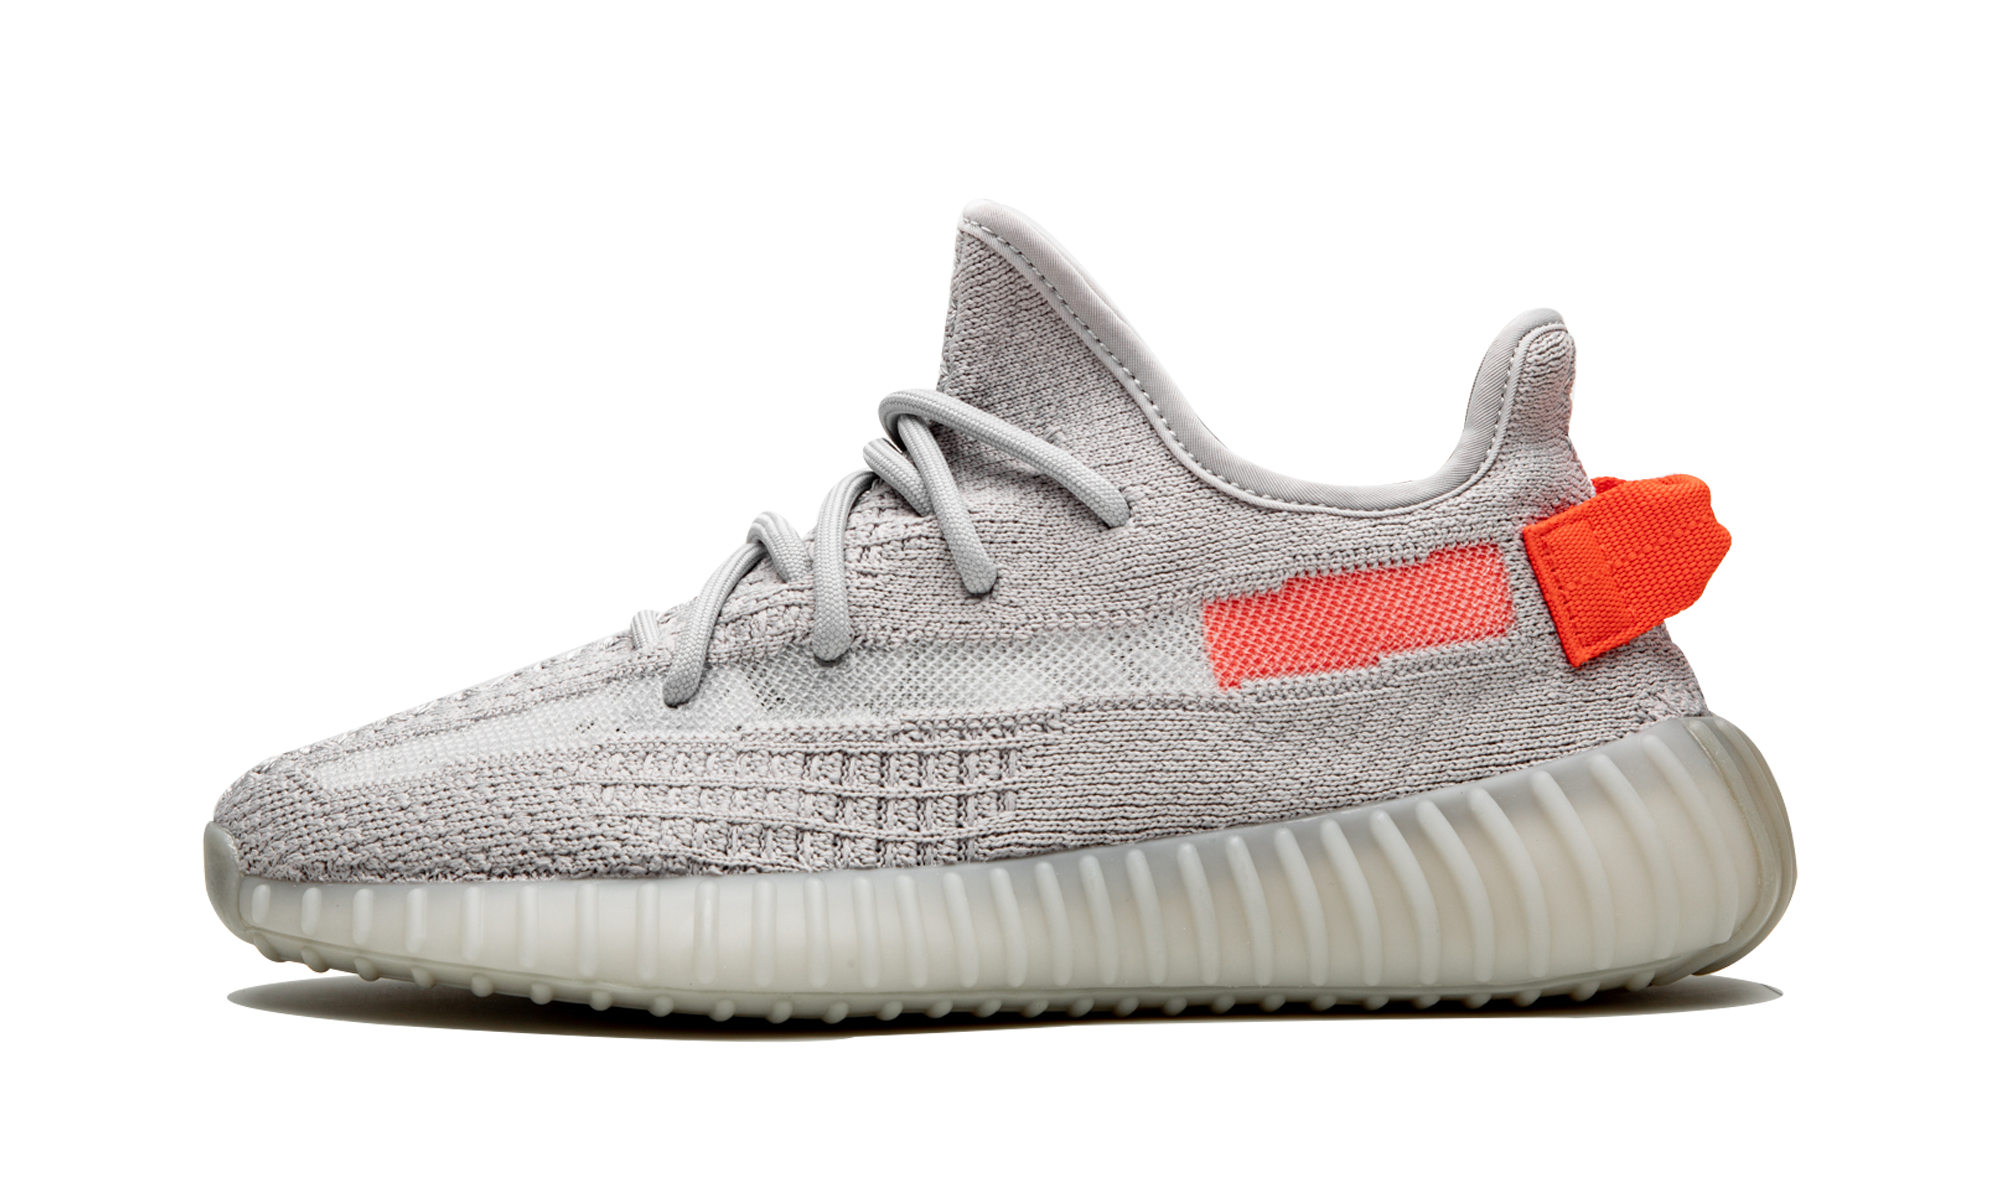 https://cdn.shopify.com/s/files/1/2358/2817/products/Wethenew-Sneakers-France-Adidas-Yeezy-Boost-350-V2-Tail-Light-1.png?v=1581933562